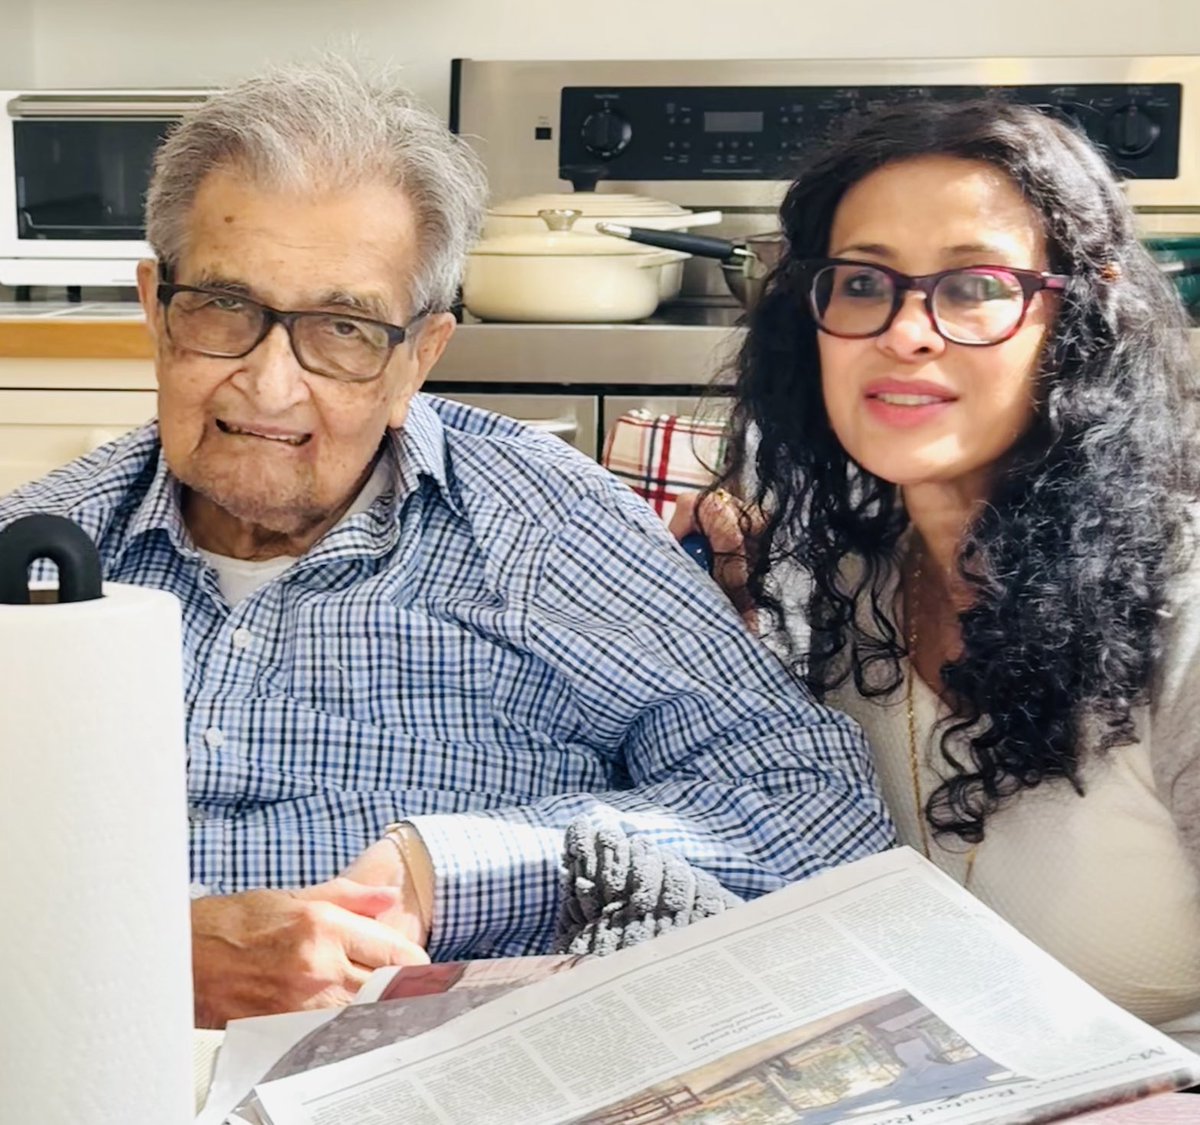 “The role of a free press in disseminating knowledge, giving voice to the disadvantaged and facilitating critical scrutiny is necessary for informed politics. Press freedom is central to discussions on social justice.” —Amartya Sen #PressFreedomDay #PressFreedom #FreedomOfSpeech